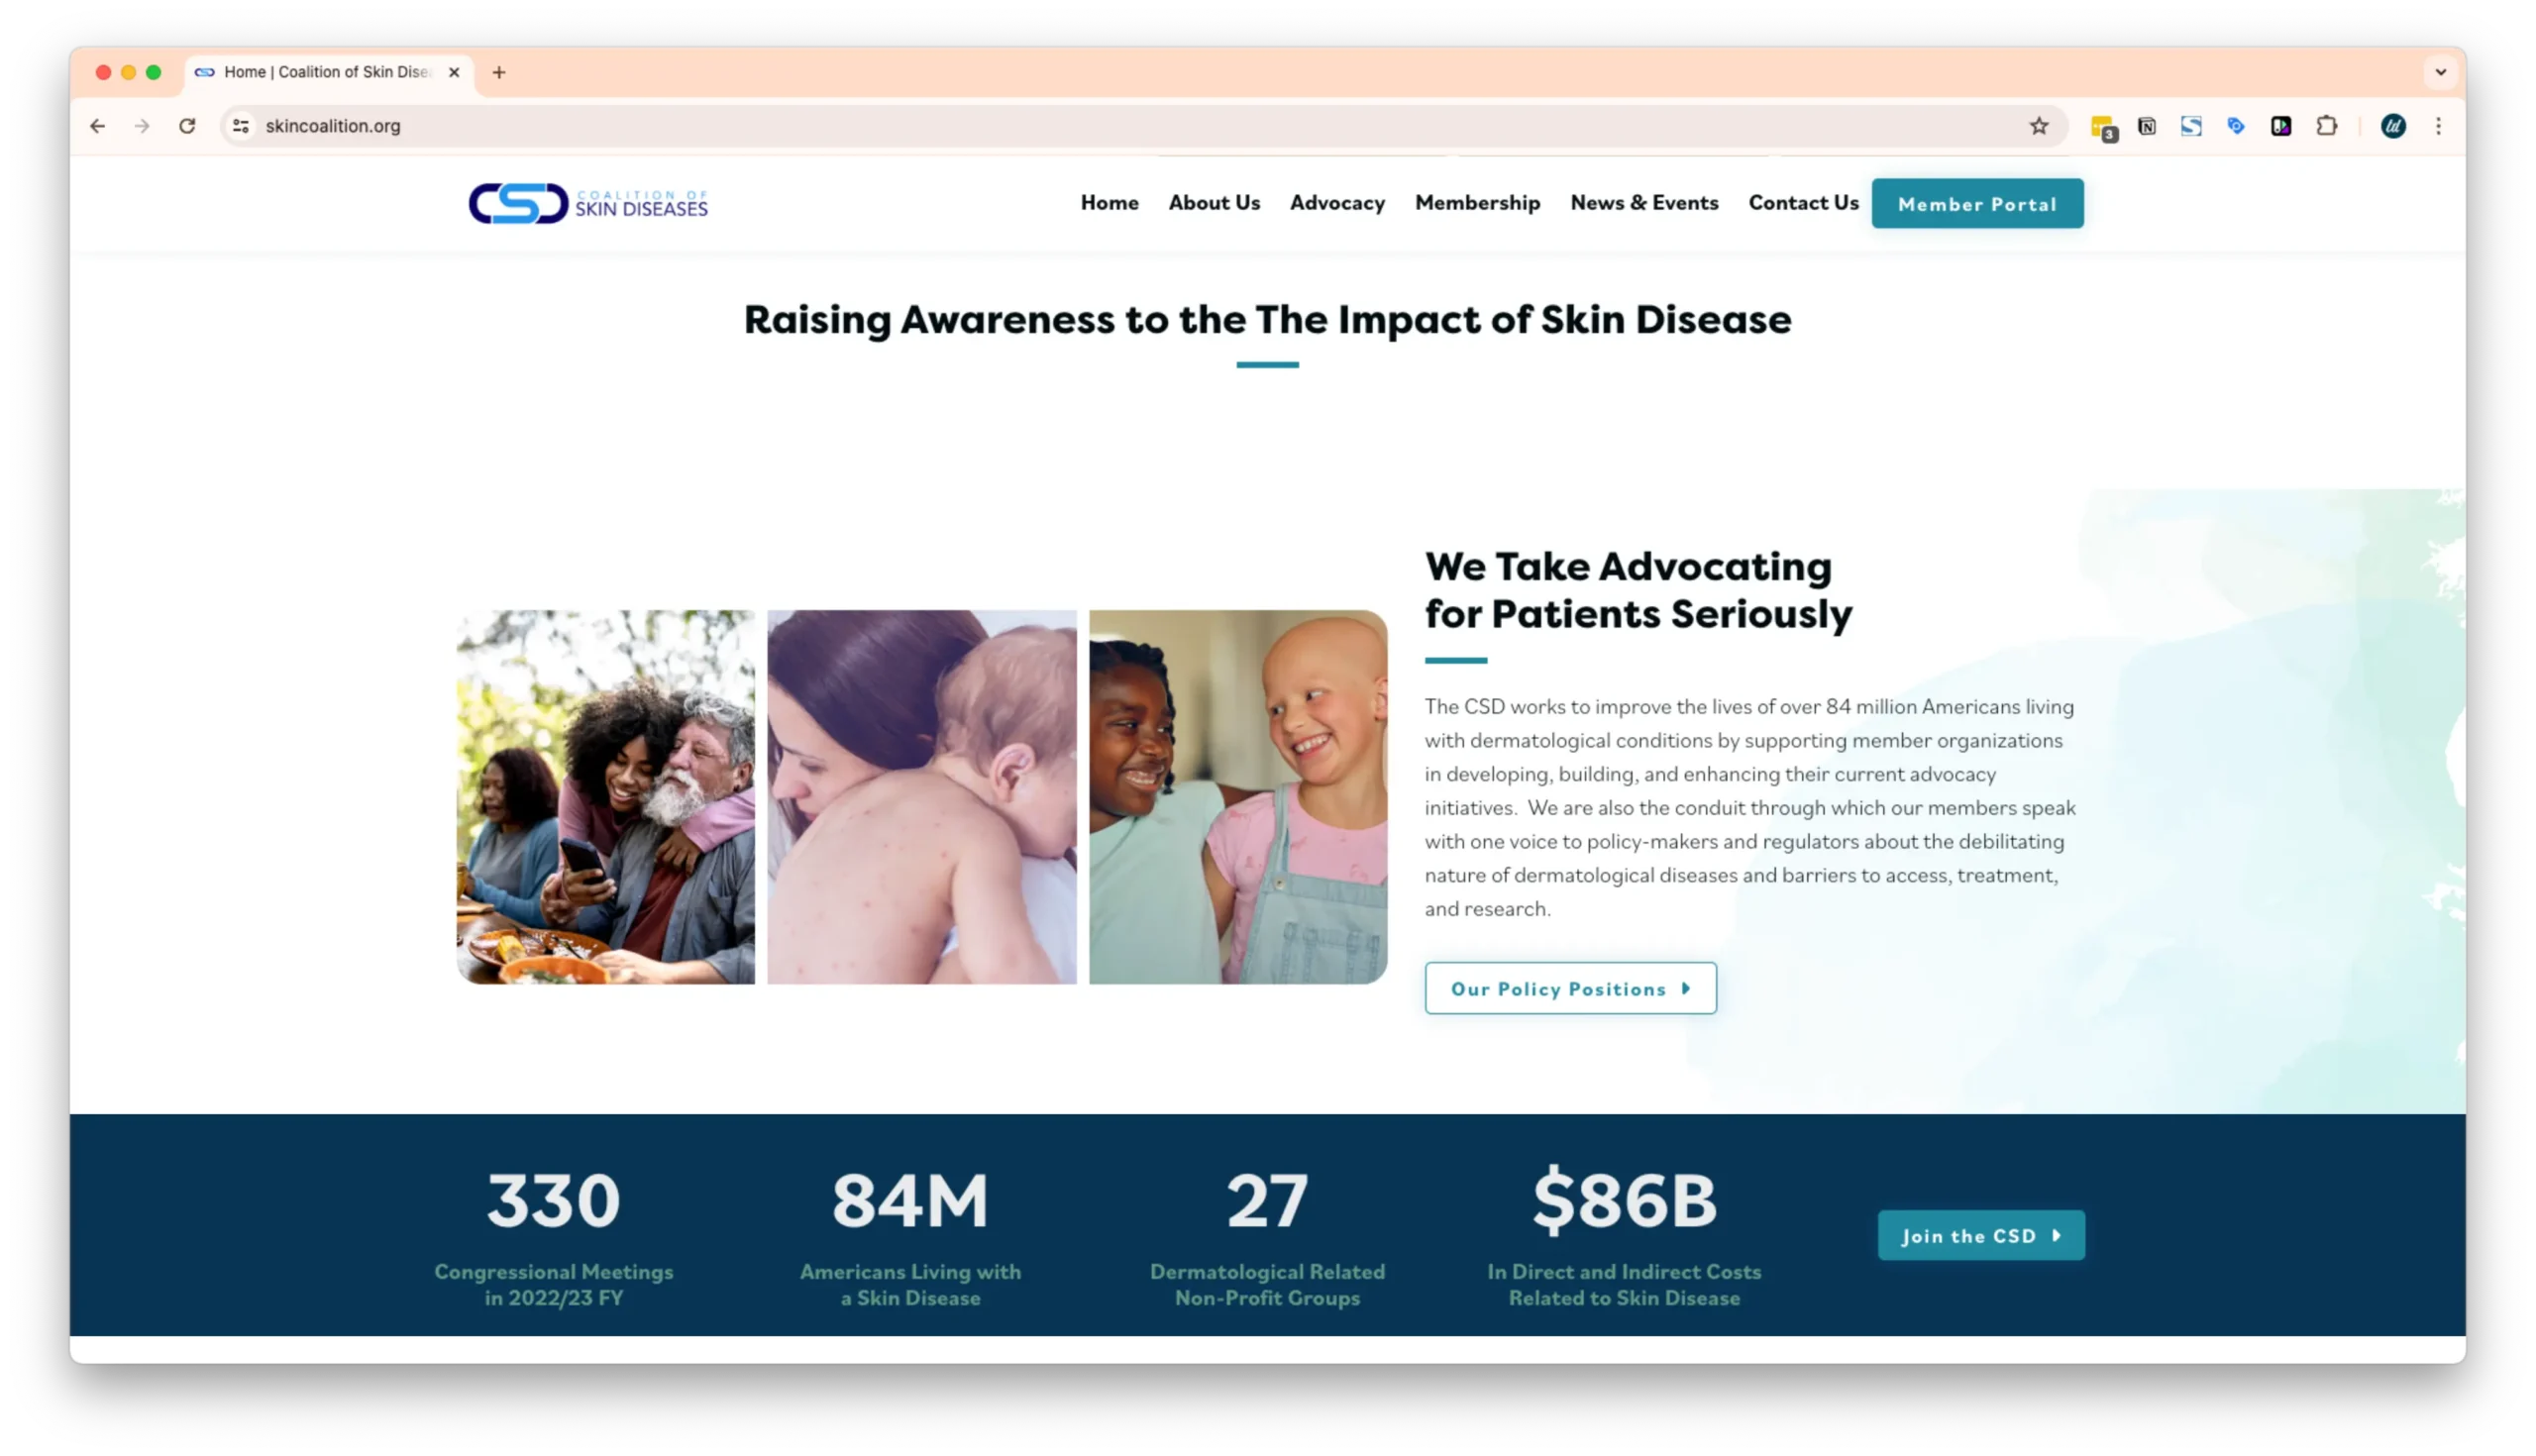 A homepage for the Coalition of Skin Diseases, highlighting their advocacy work. Images show a woman embracing an older man, a child with back acne being comforted by a woman, and two smiling children. Statistics about the organization's impact are displayed at the bottom.